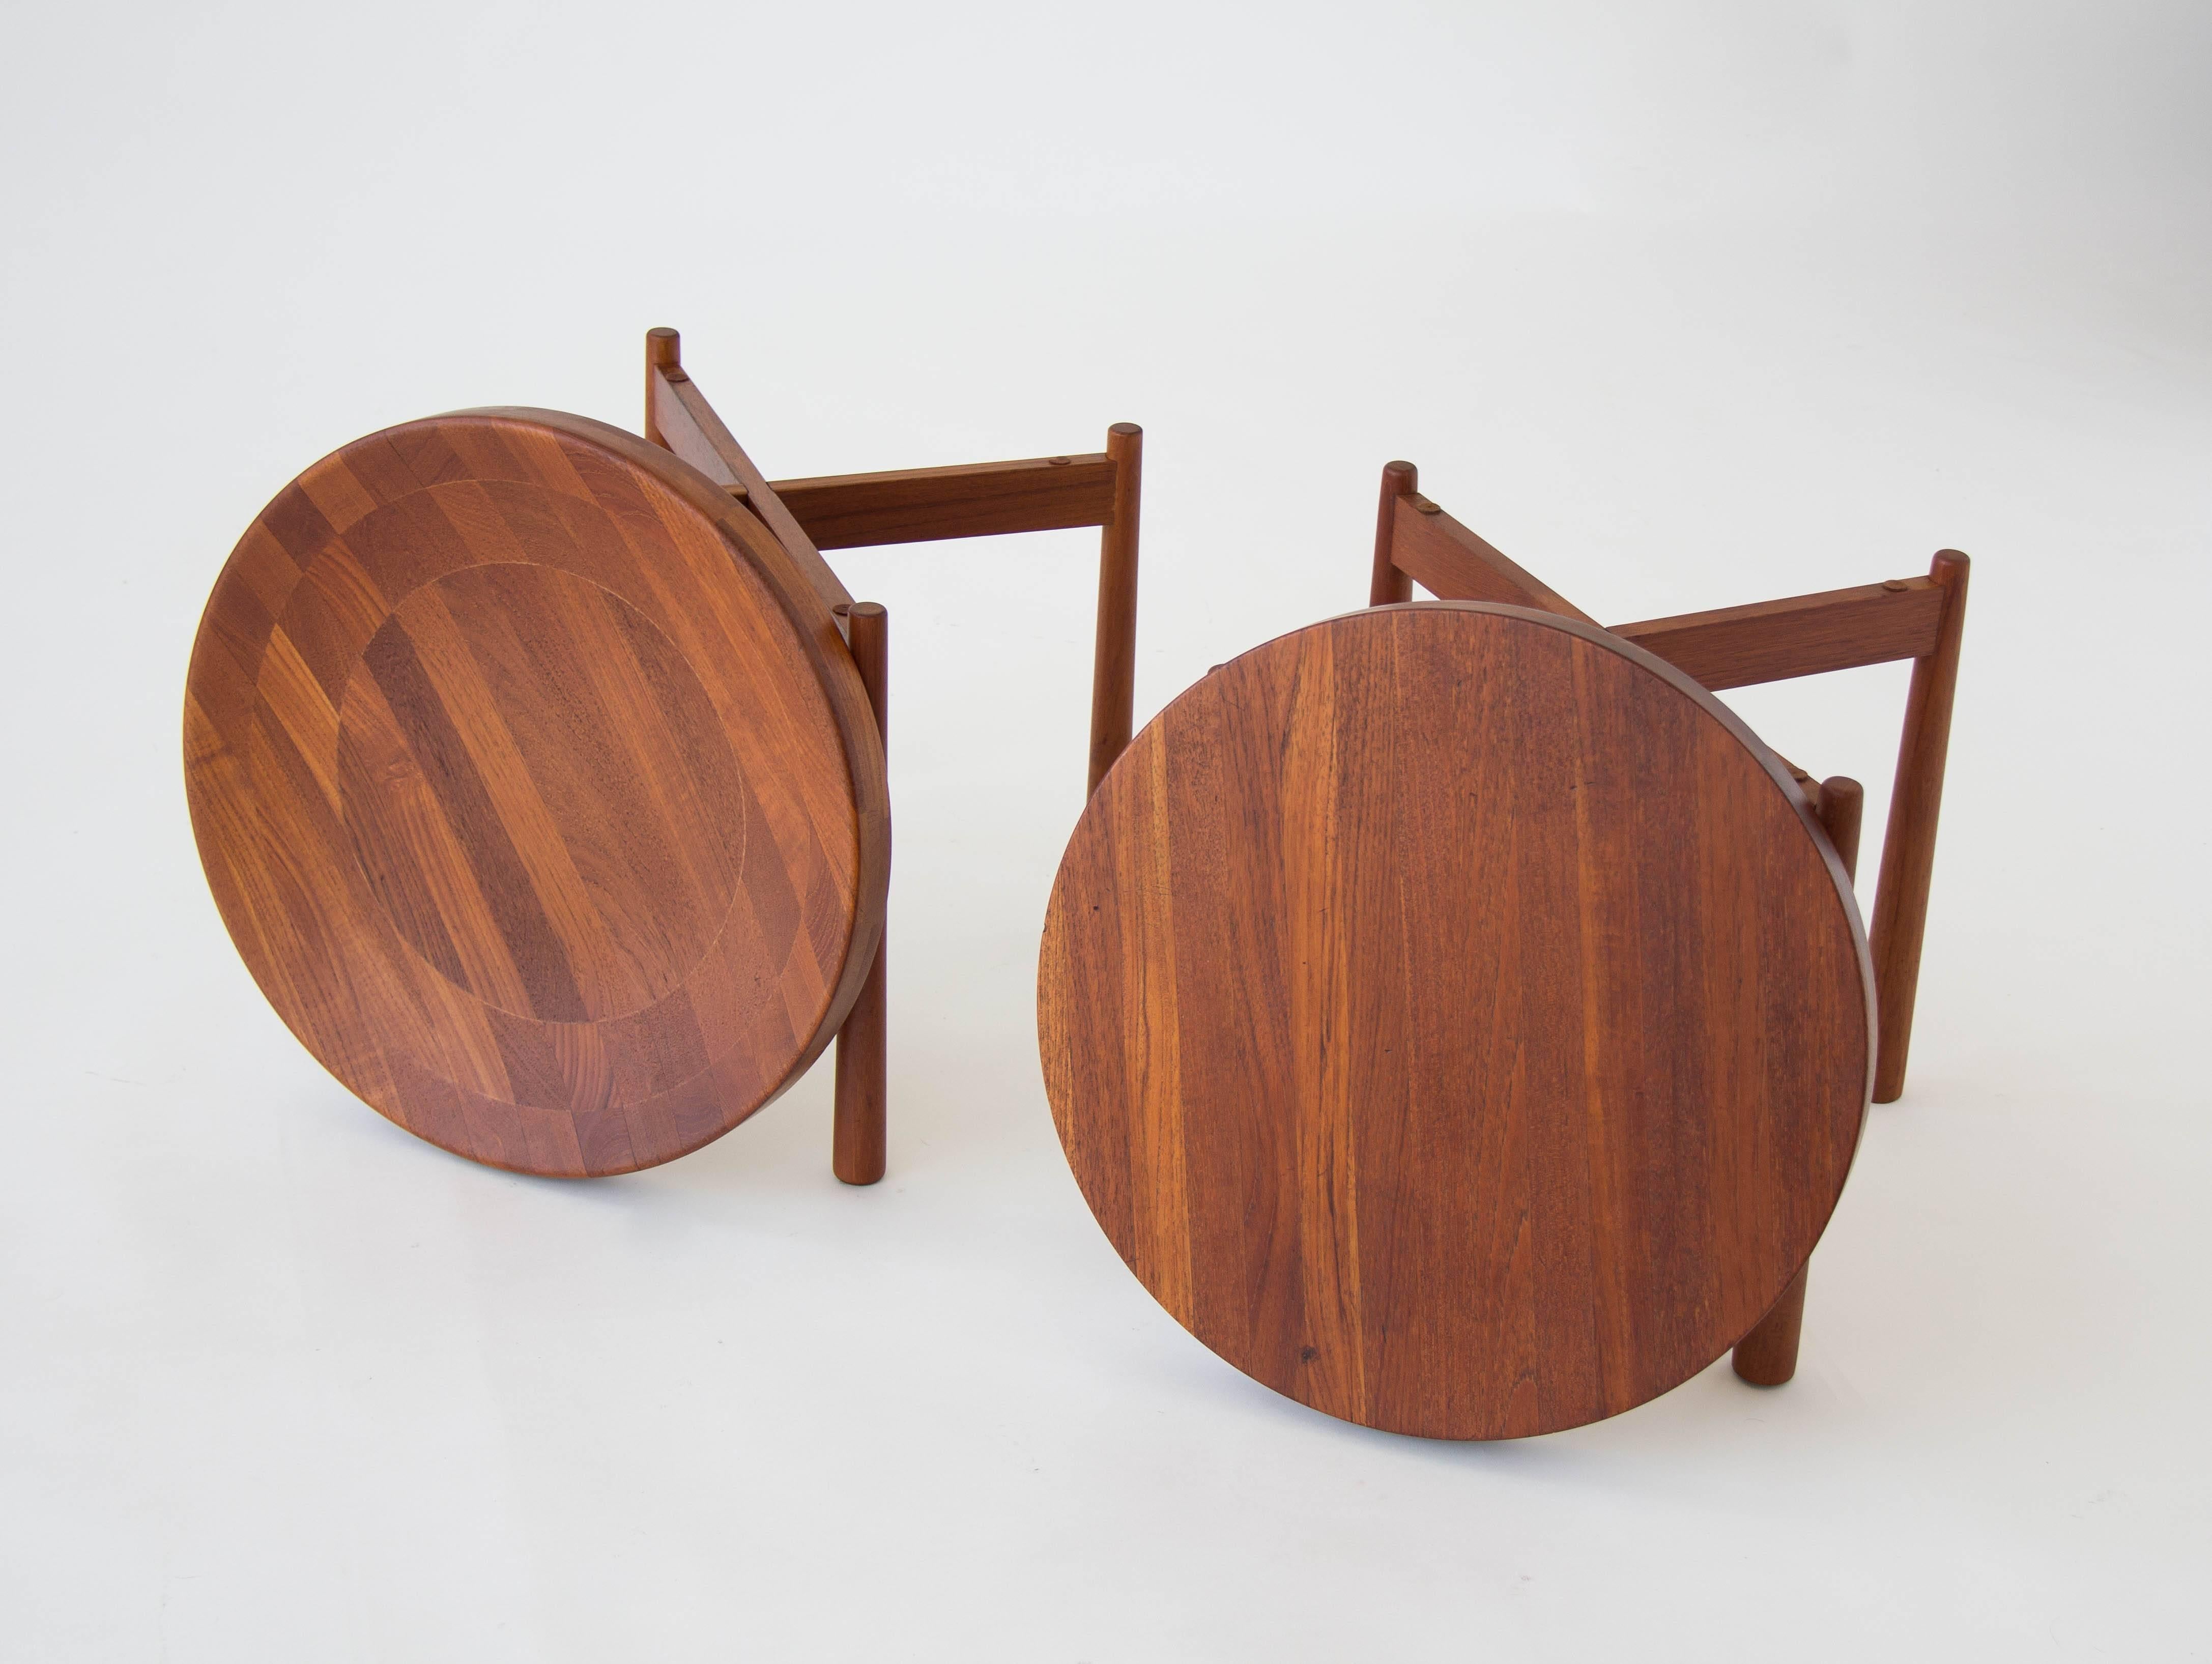 20th Century Pair of Teak Tray Tables in the style of Jens Quistgaard